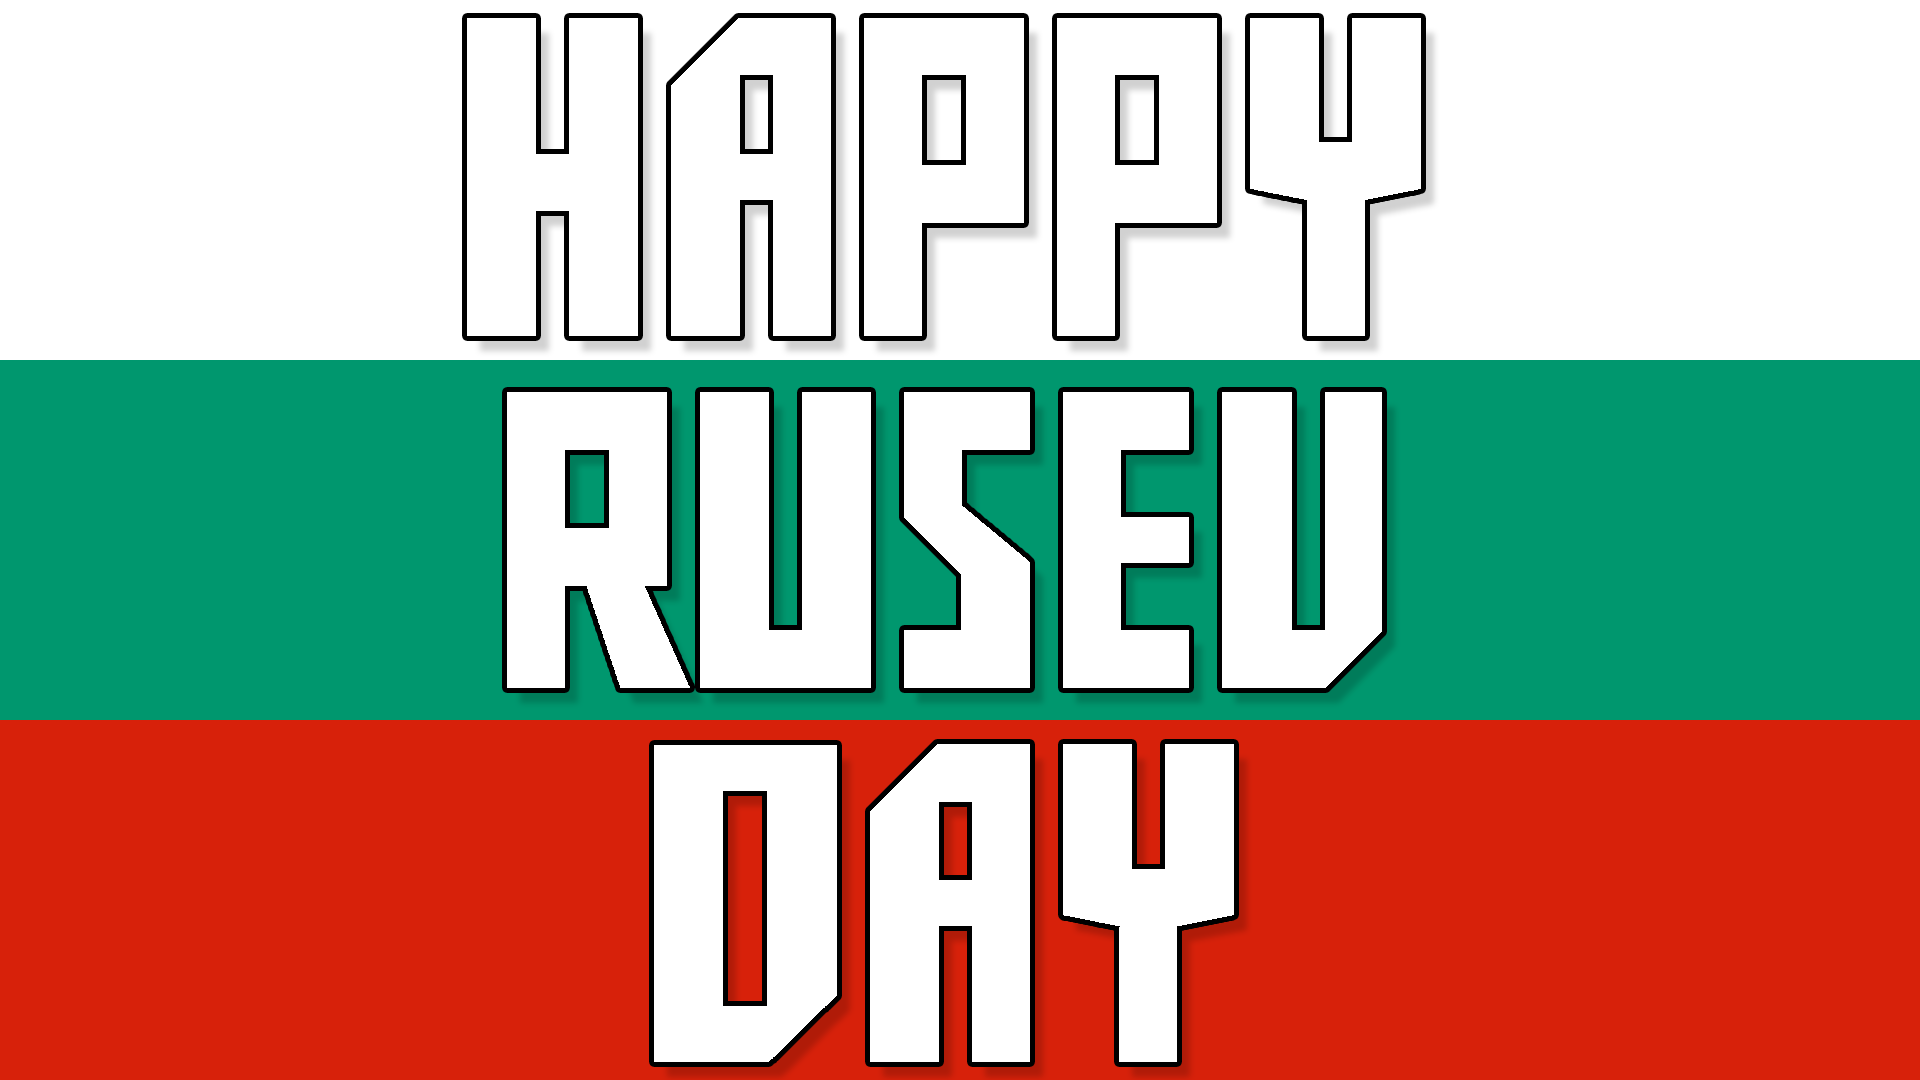 Rusev Logo - Couldn't find any good Happy Rusev Day wallpapers so I made some ...